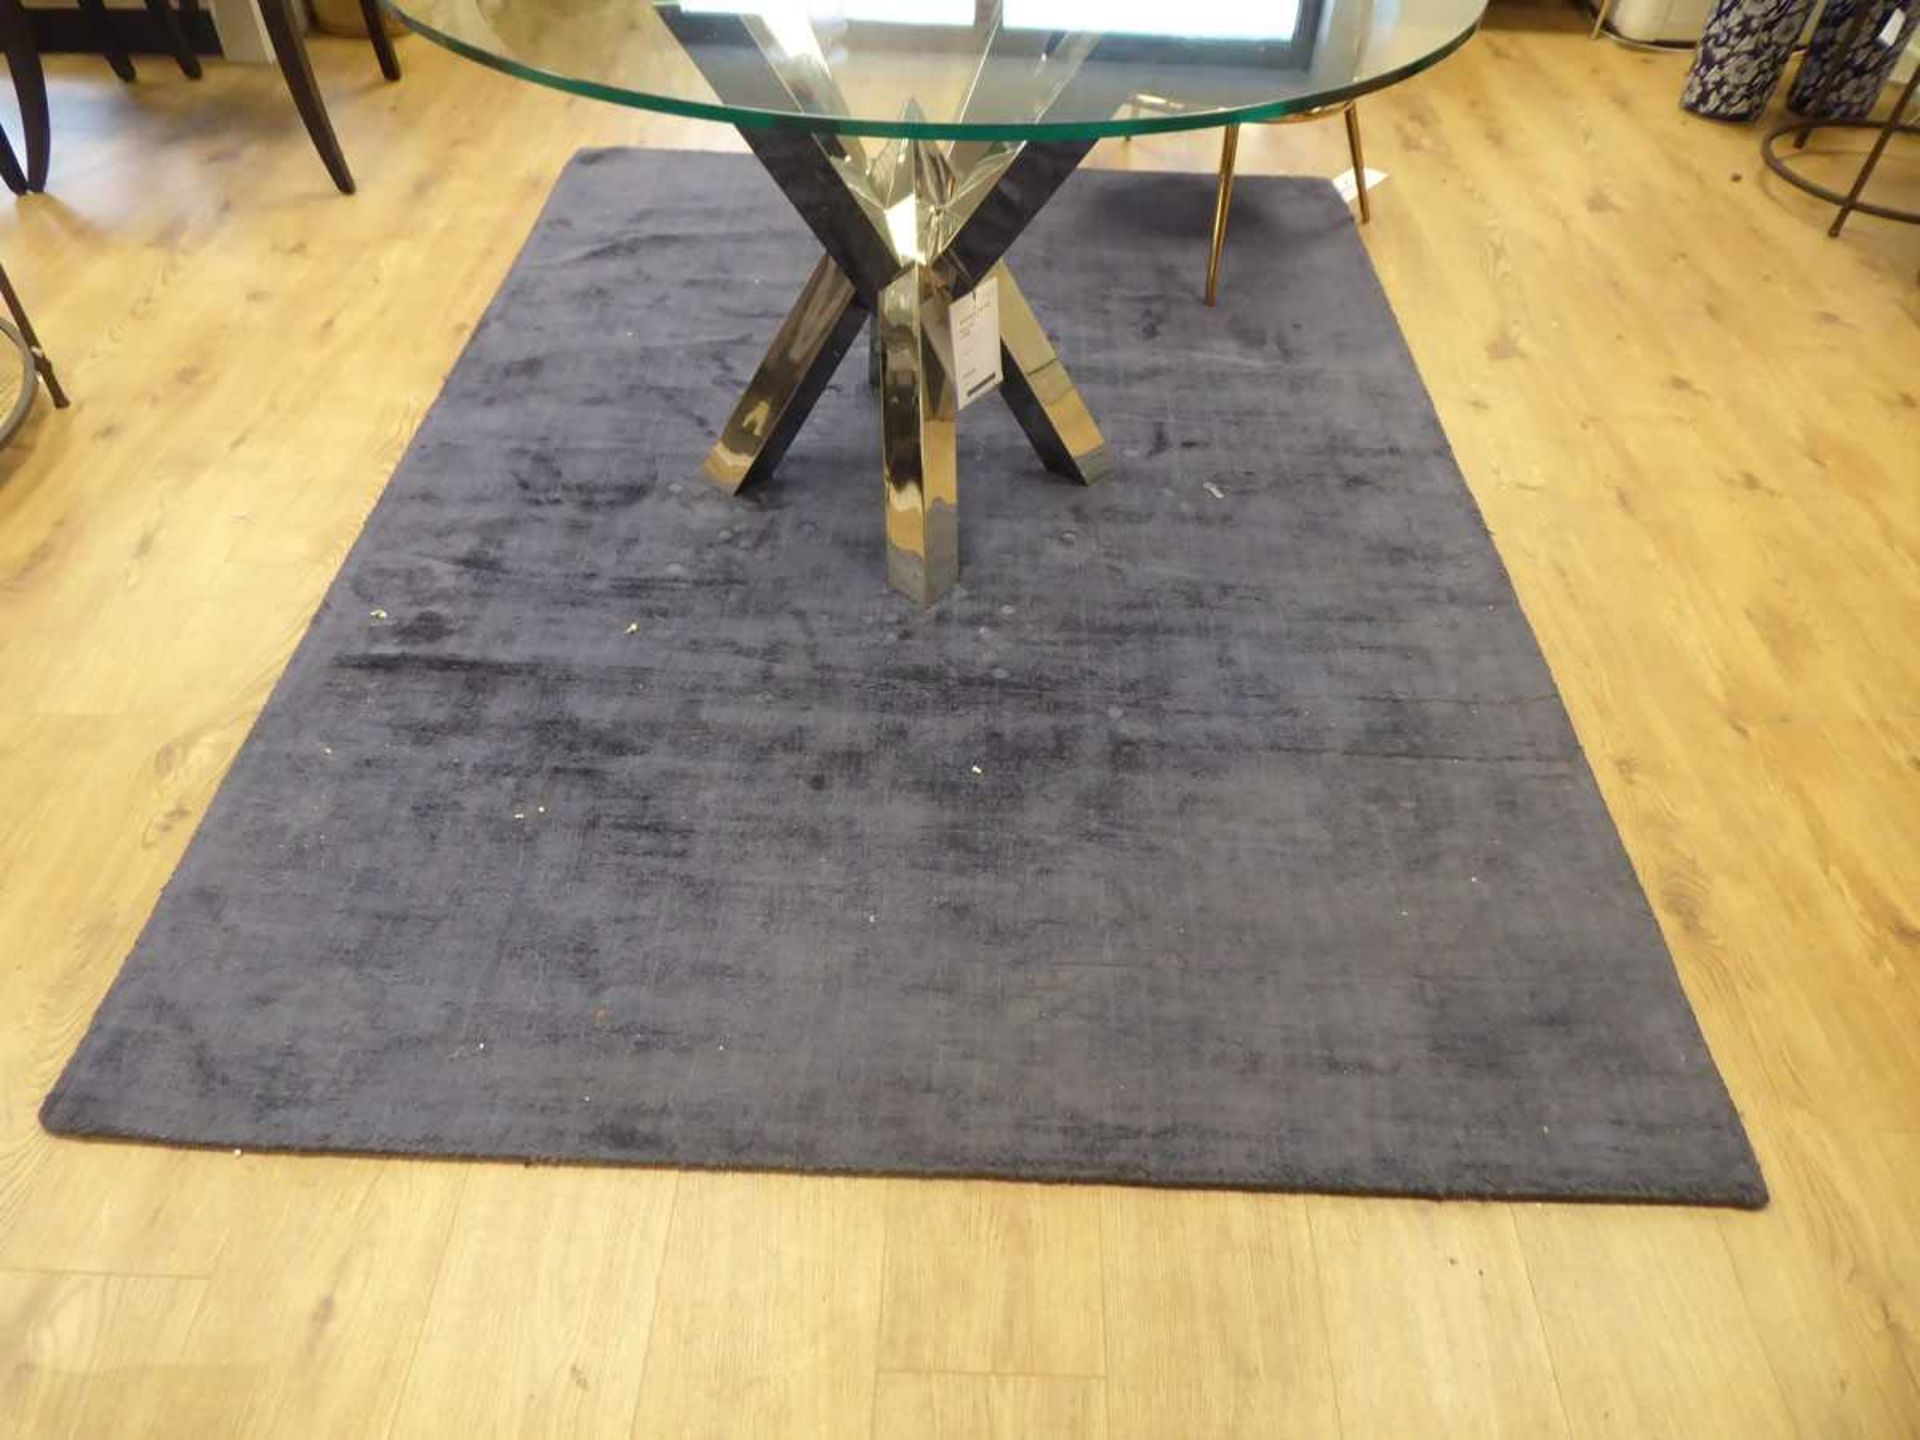 +VAT 3 various rugs in dark blue, light blue and grey patterned finish